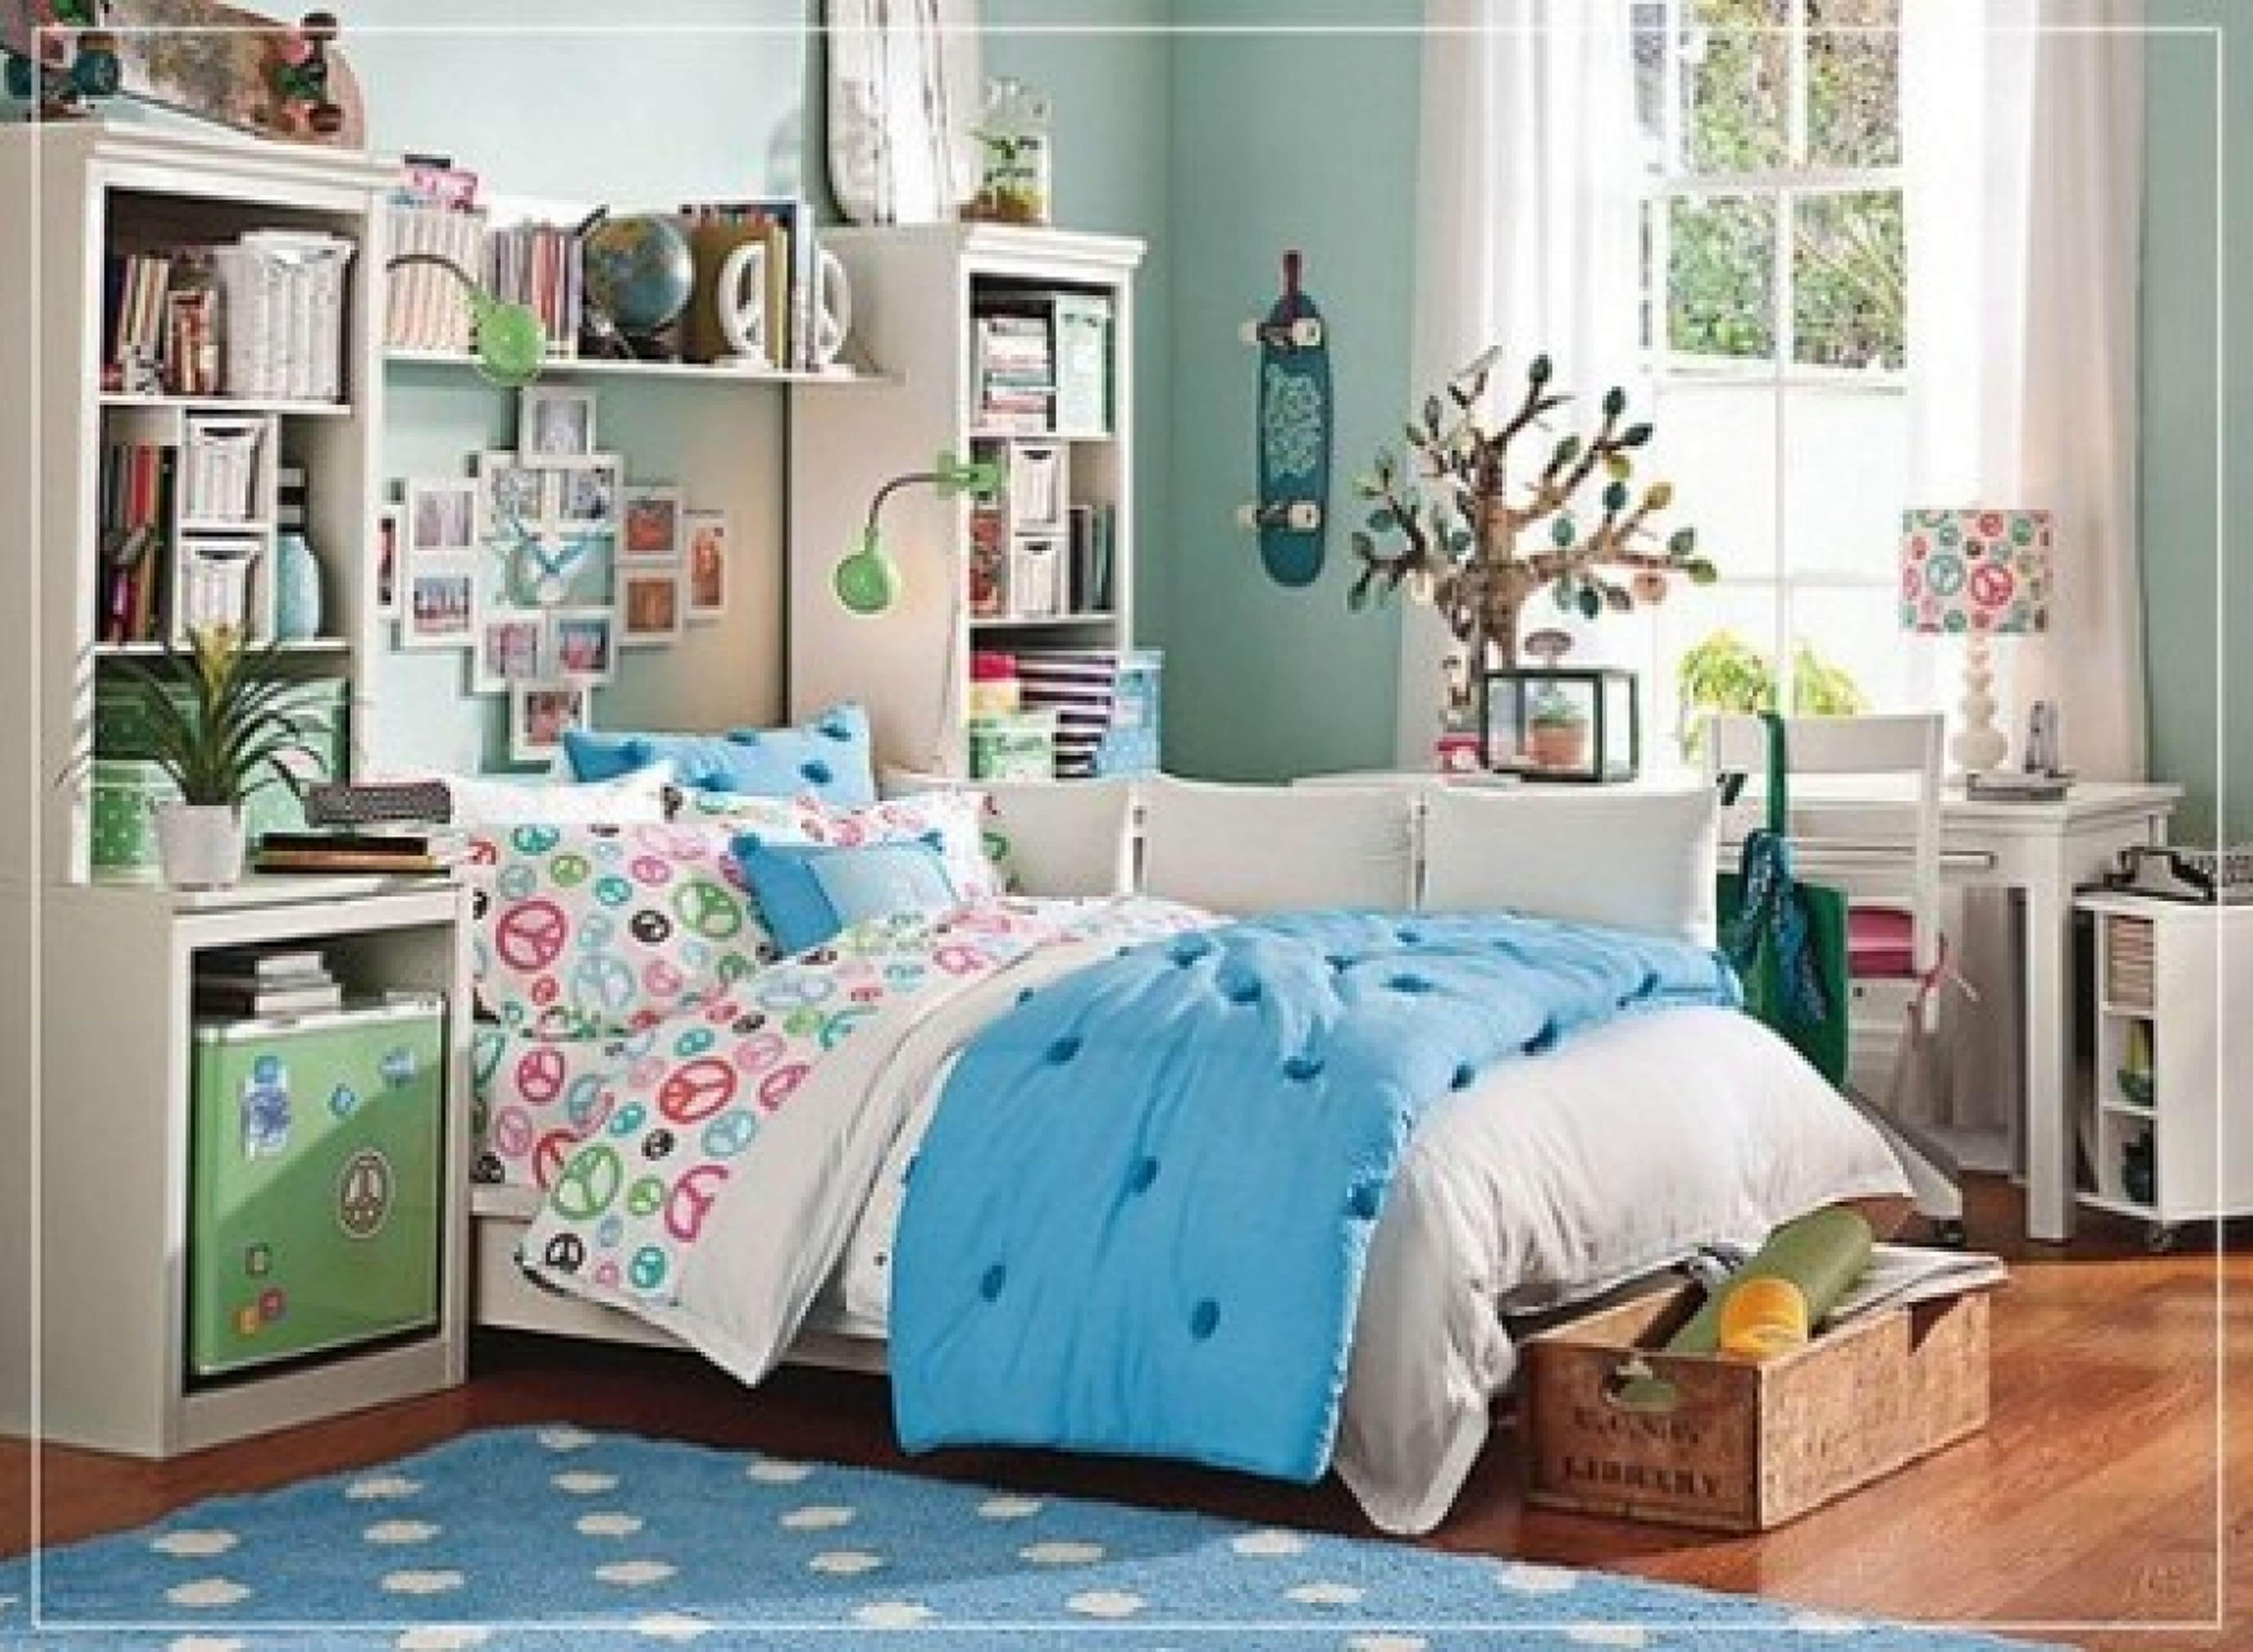 10 Ideal Sophisticated Teenage Girl Bedroom Ideas bedroom sophisticated teenage girl bedroom ideas for small rooms 2022